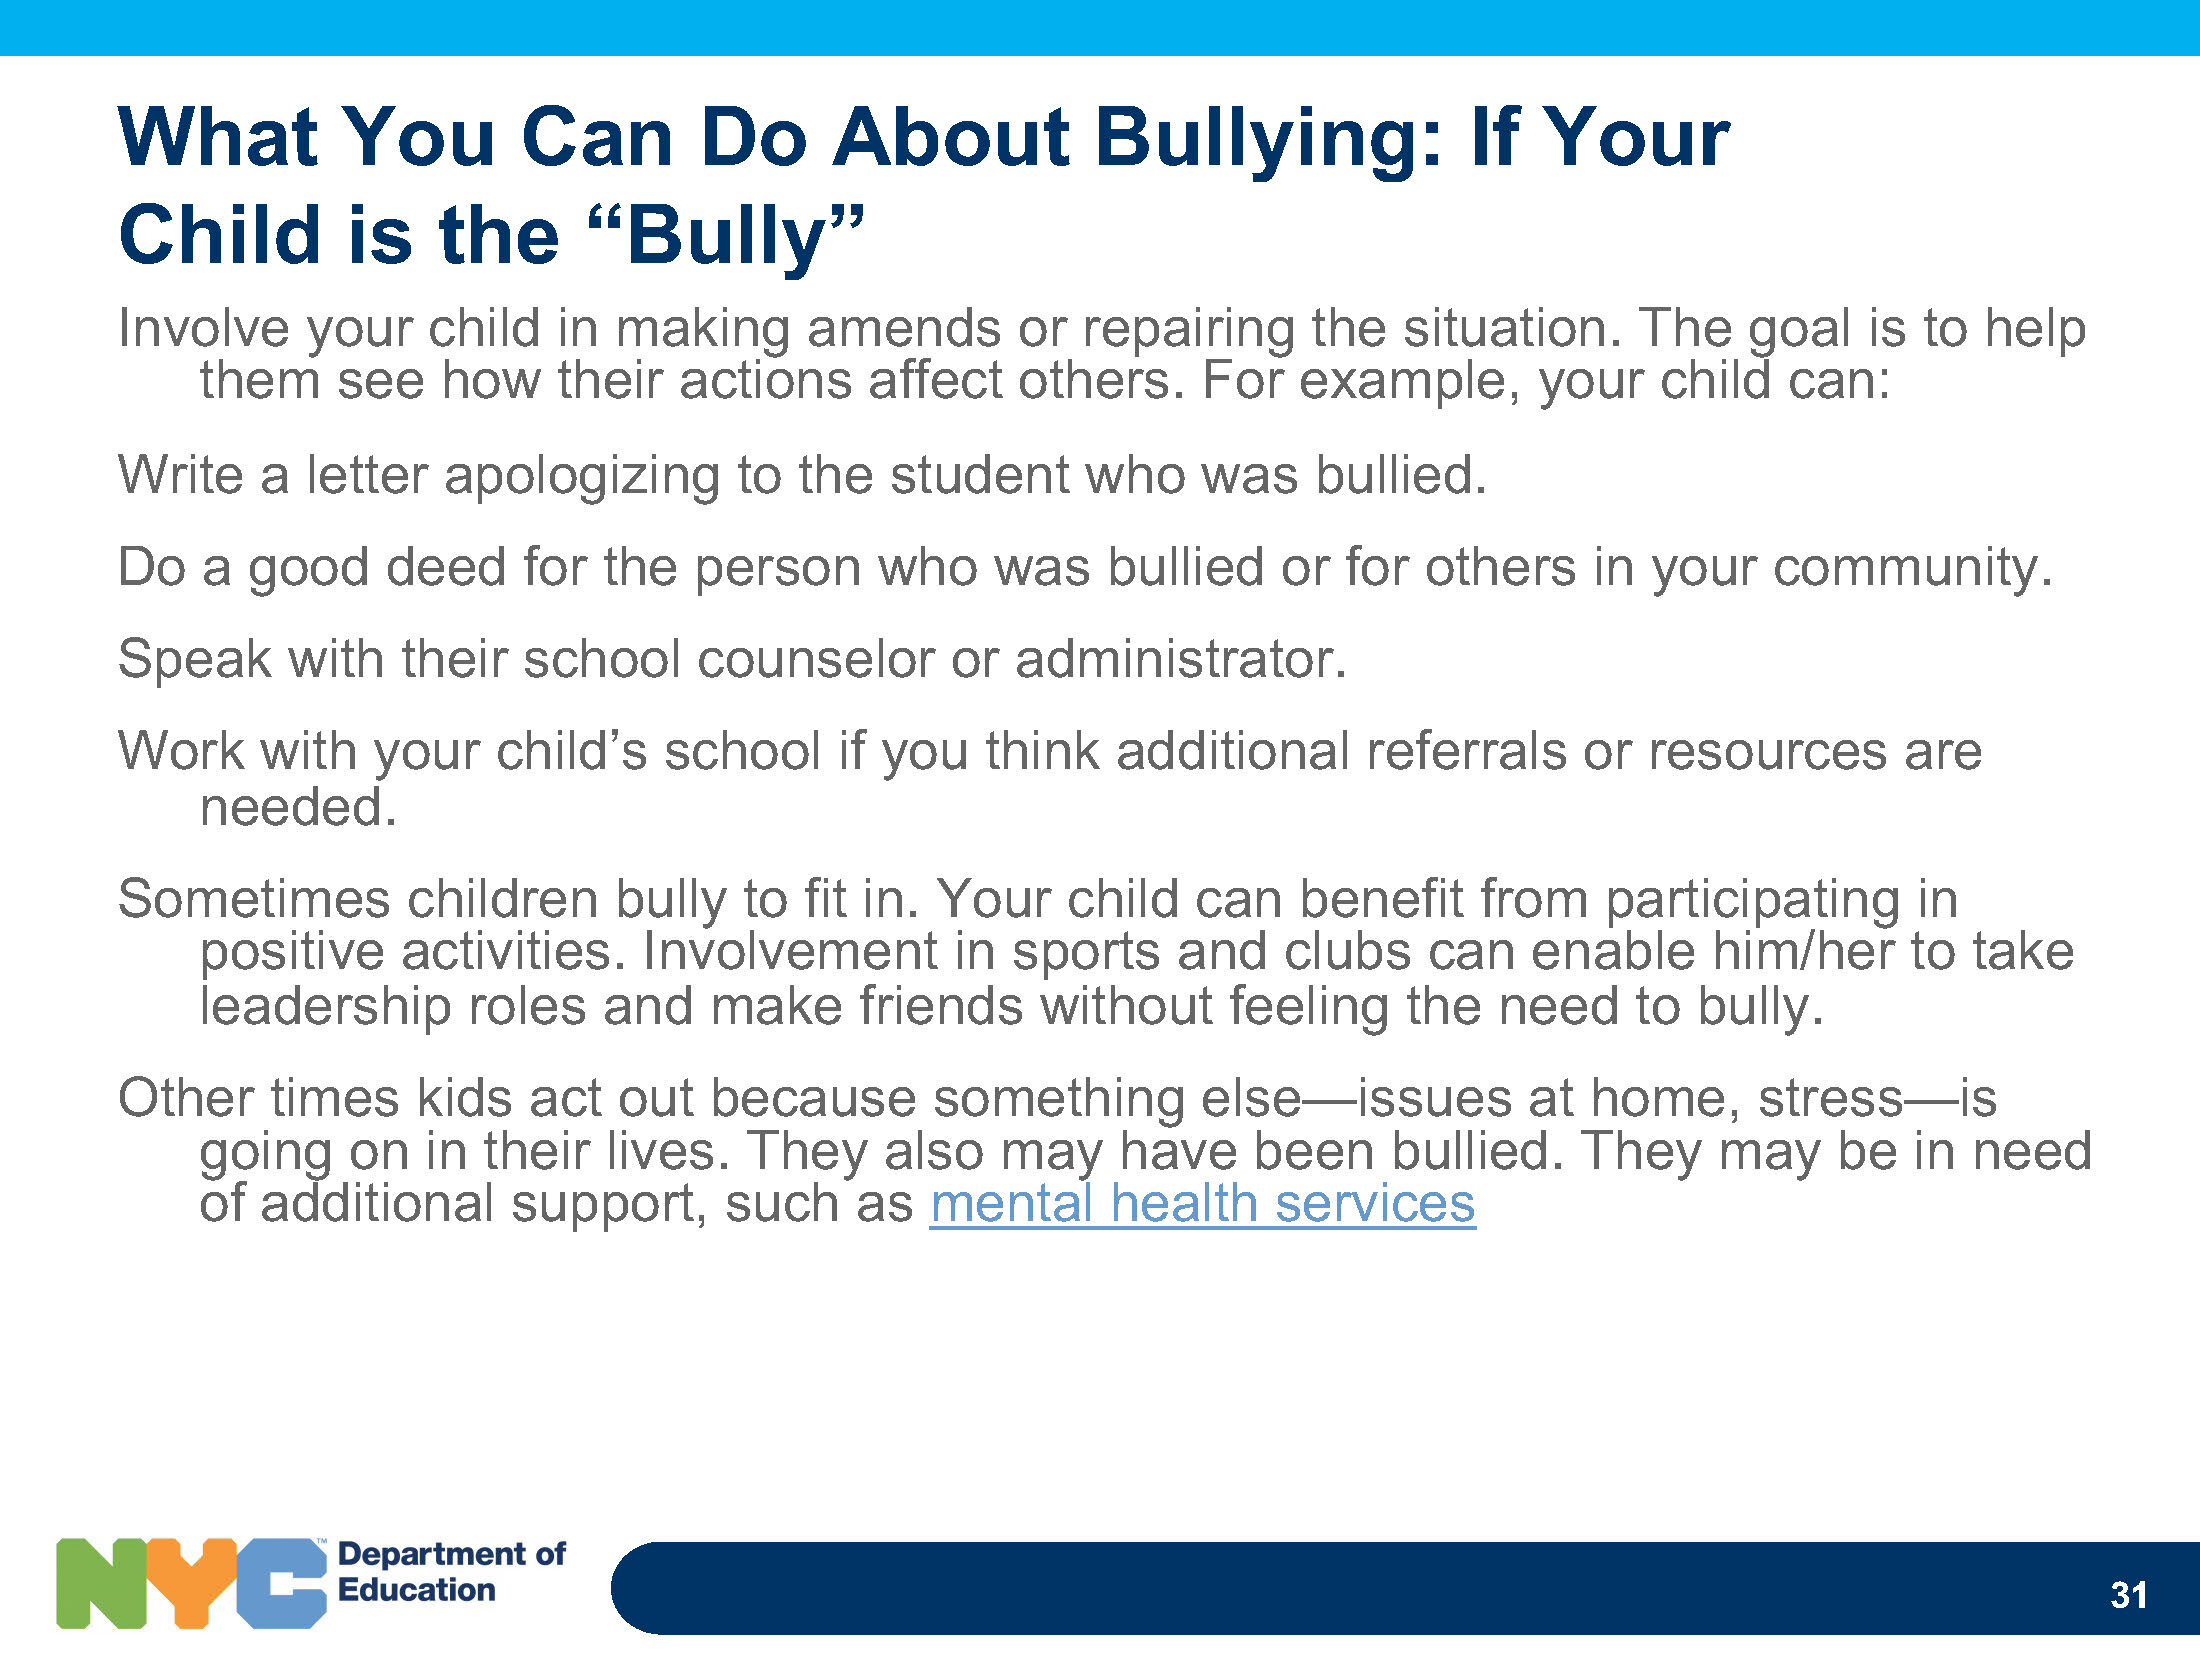 face-bullying-and-cyberbullying-presentation-for-parents_Page_31.jpg